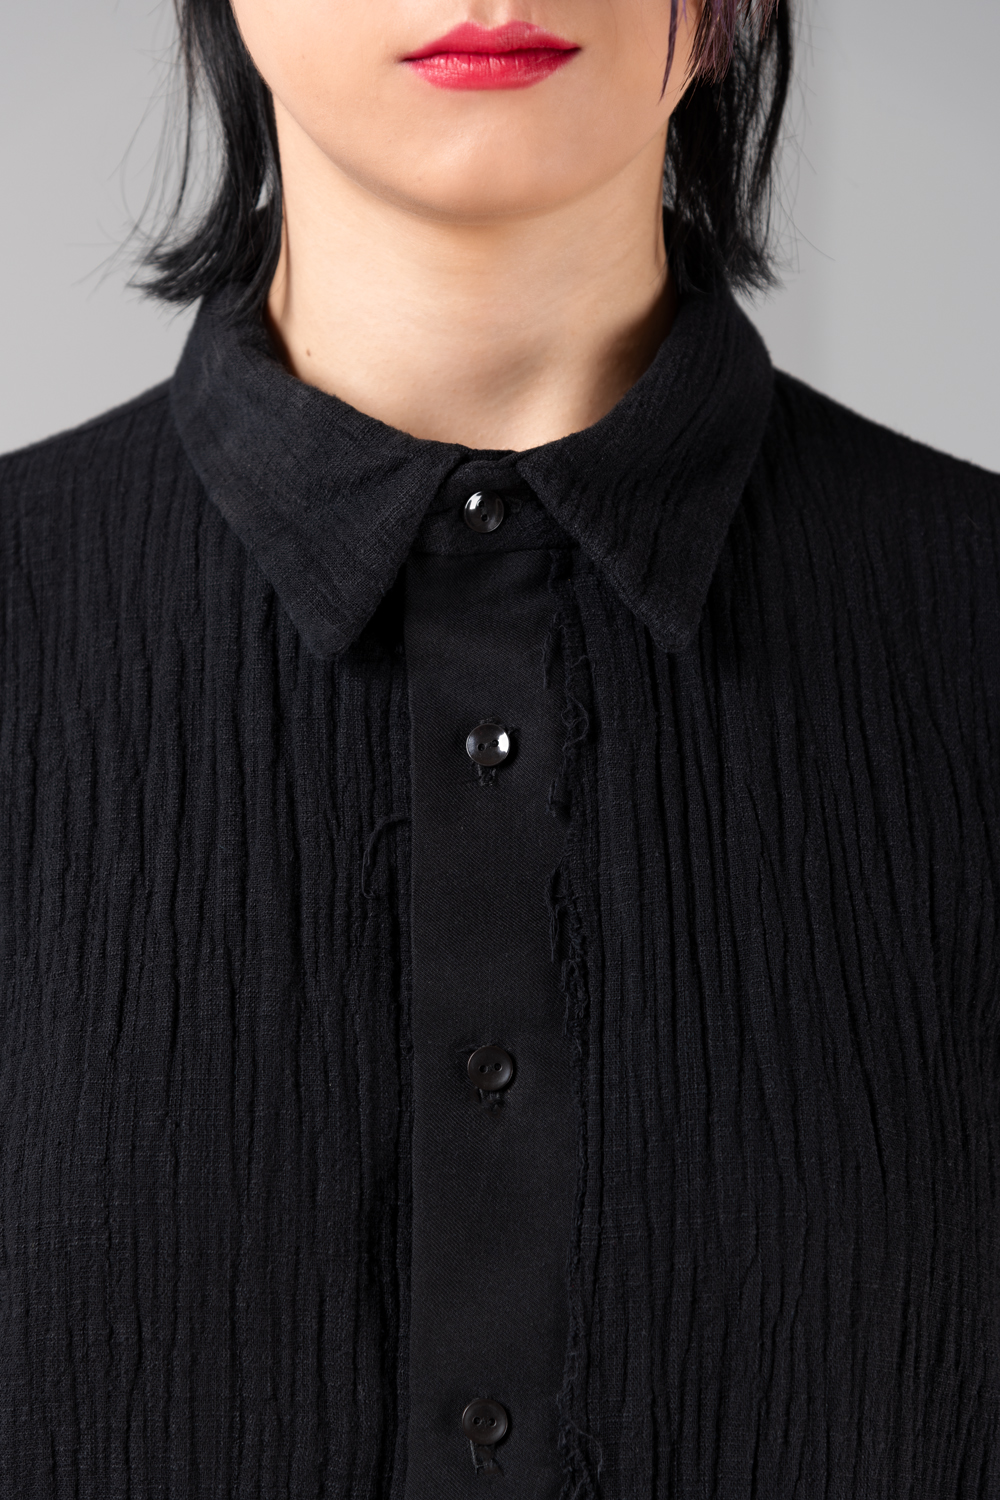 A black button-up shirt for women with relaxed cut | Haruco-vert